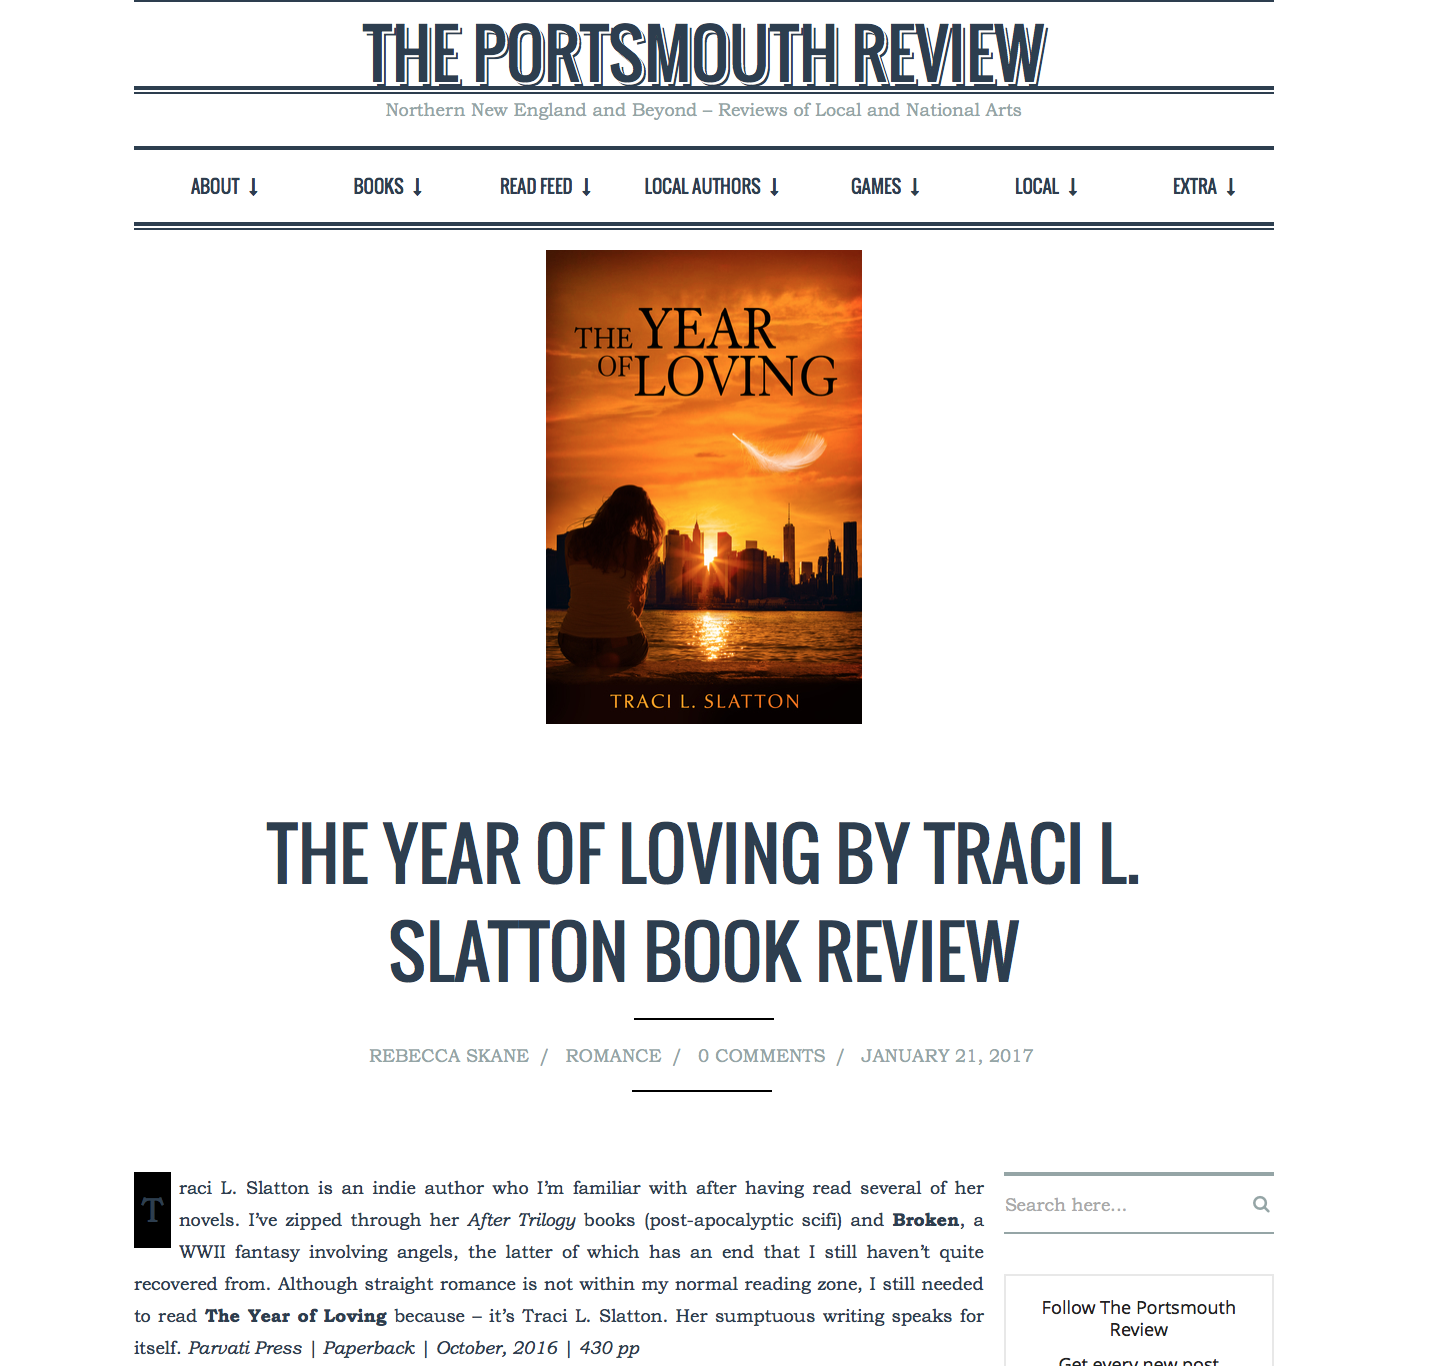 The Portsmouth Review on The Year of Loving